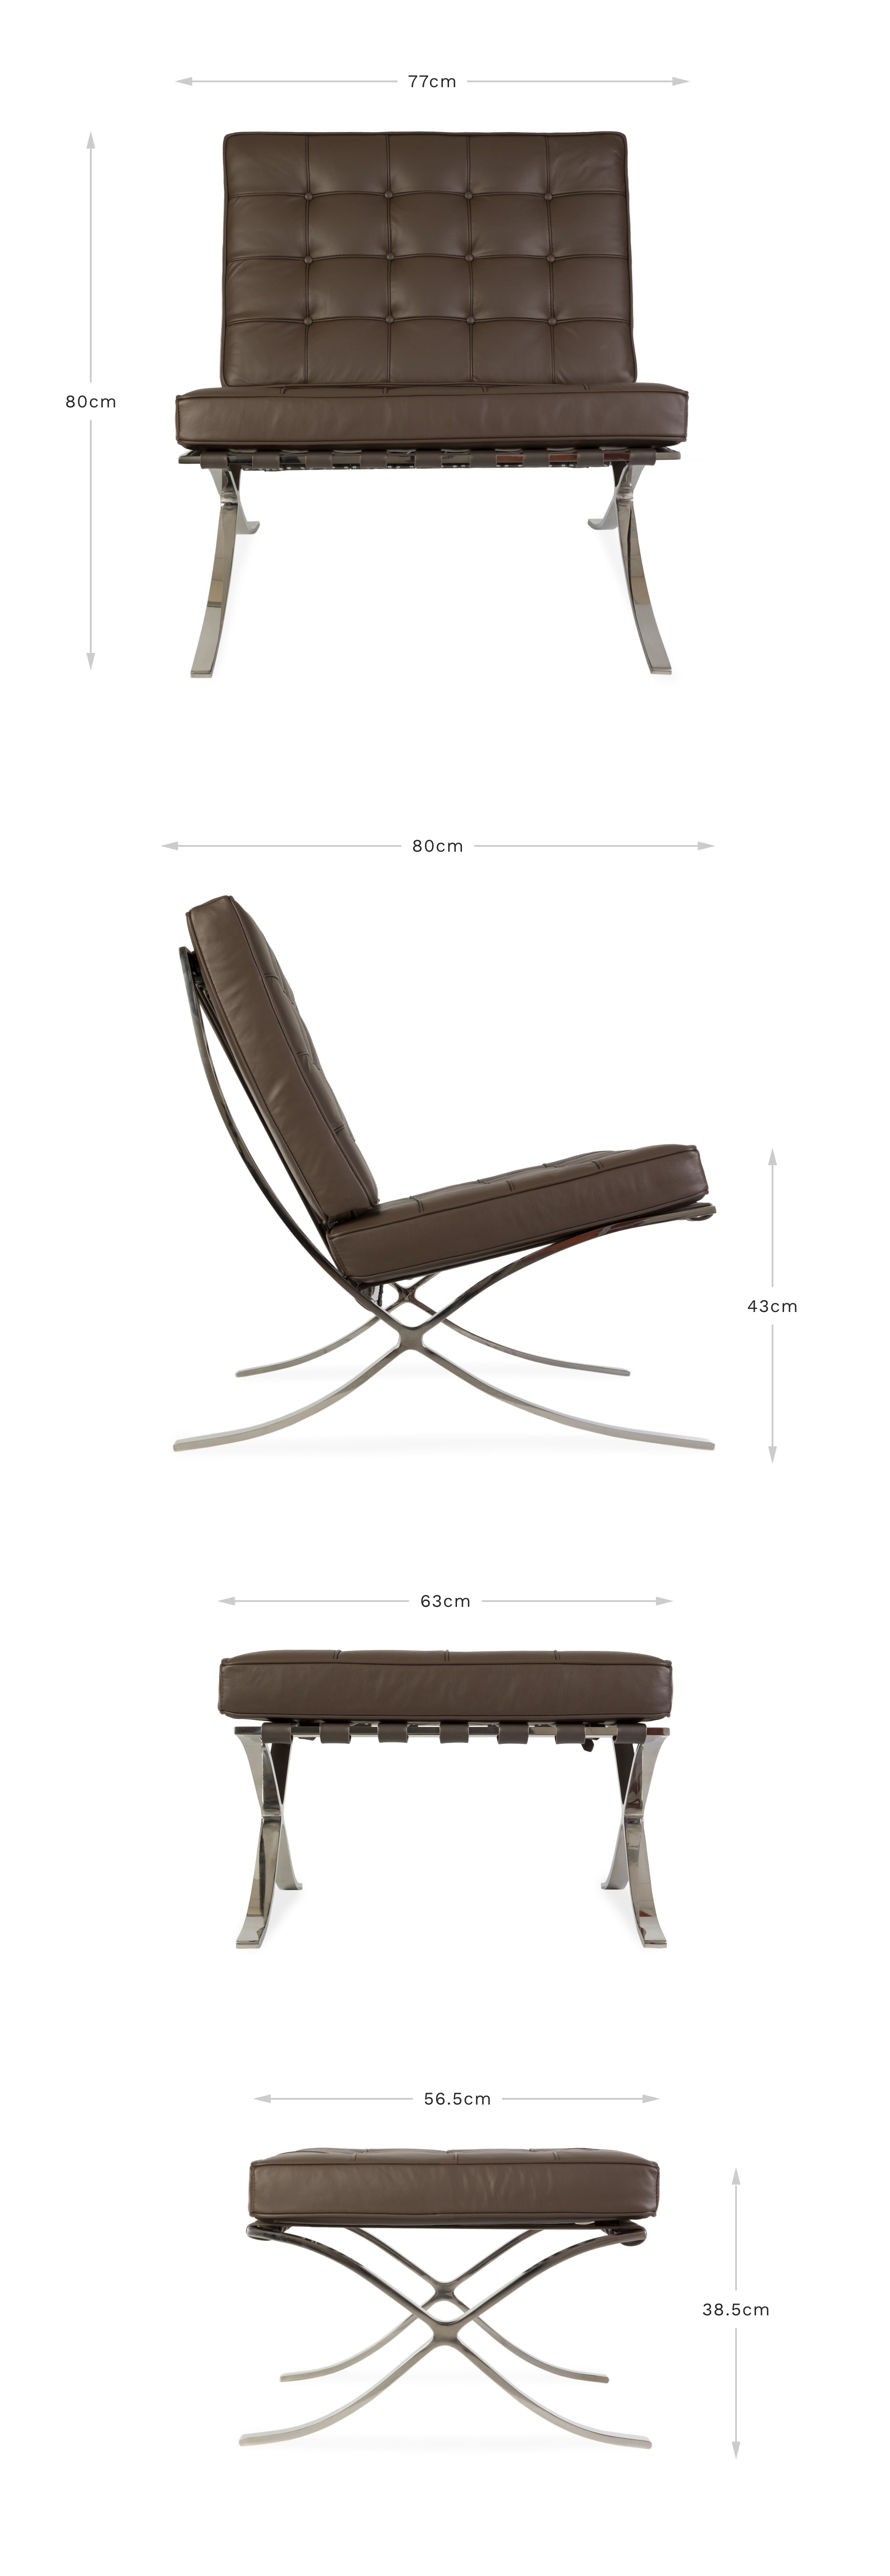 View of front and side of the brown leather Barcelona Pavilion chair and ottoman on a white background displaying the dimensions